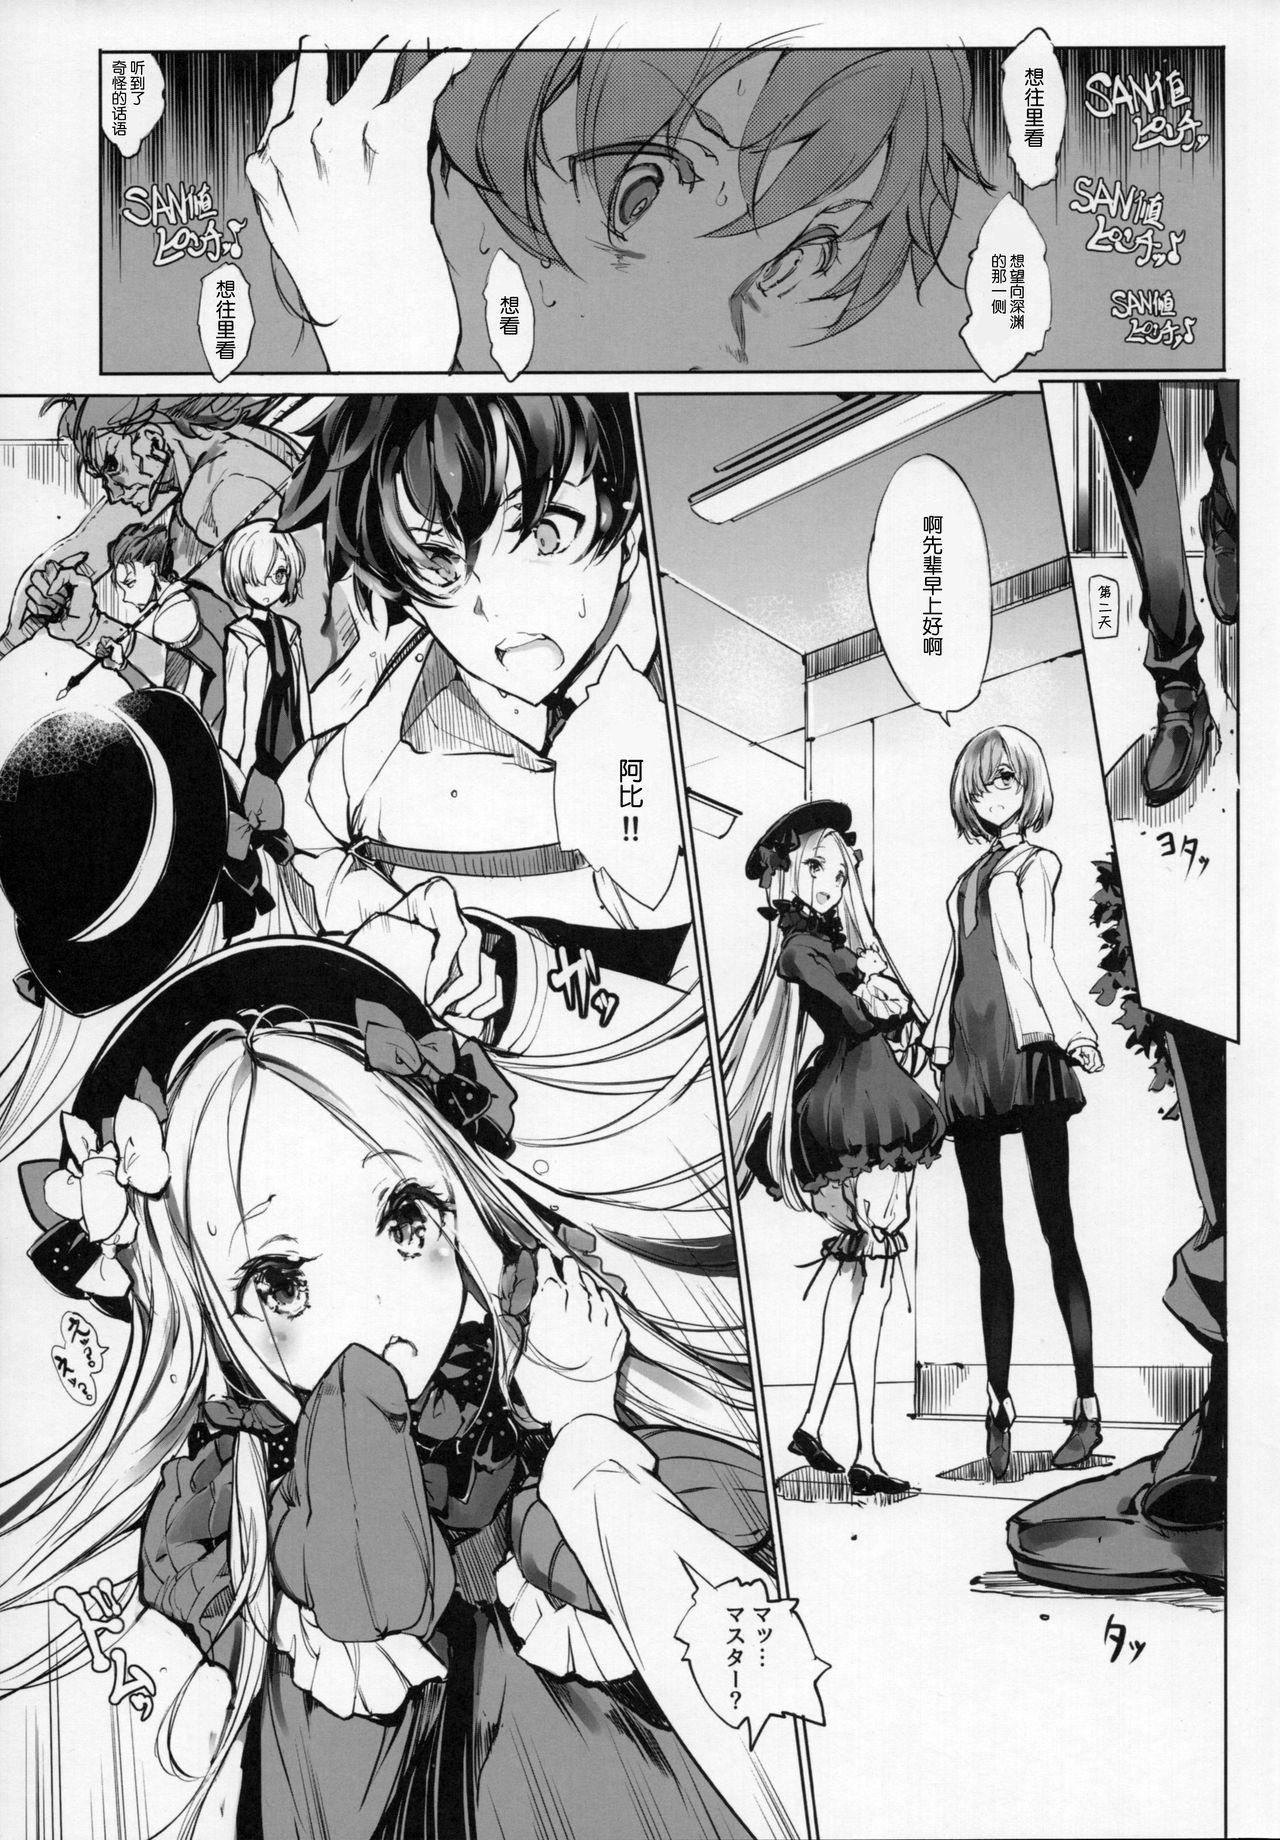 Girl On Girl Sen no Ko o Haramu Mori no Shoujo - The girl of the woods with a thousand young - Fate grand order Girls Getting Fucked - Page 7